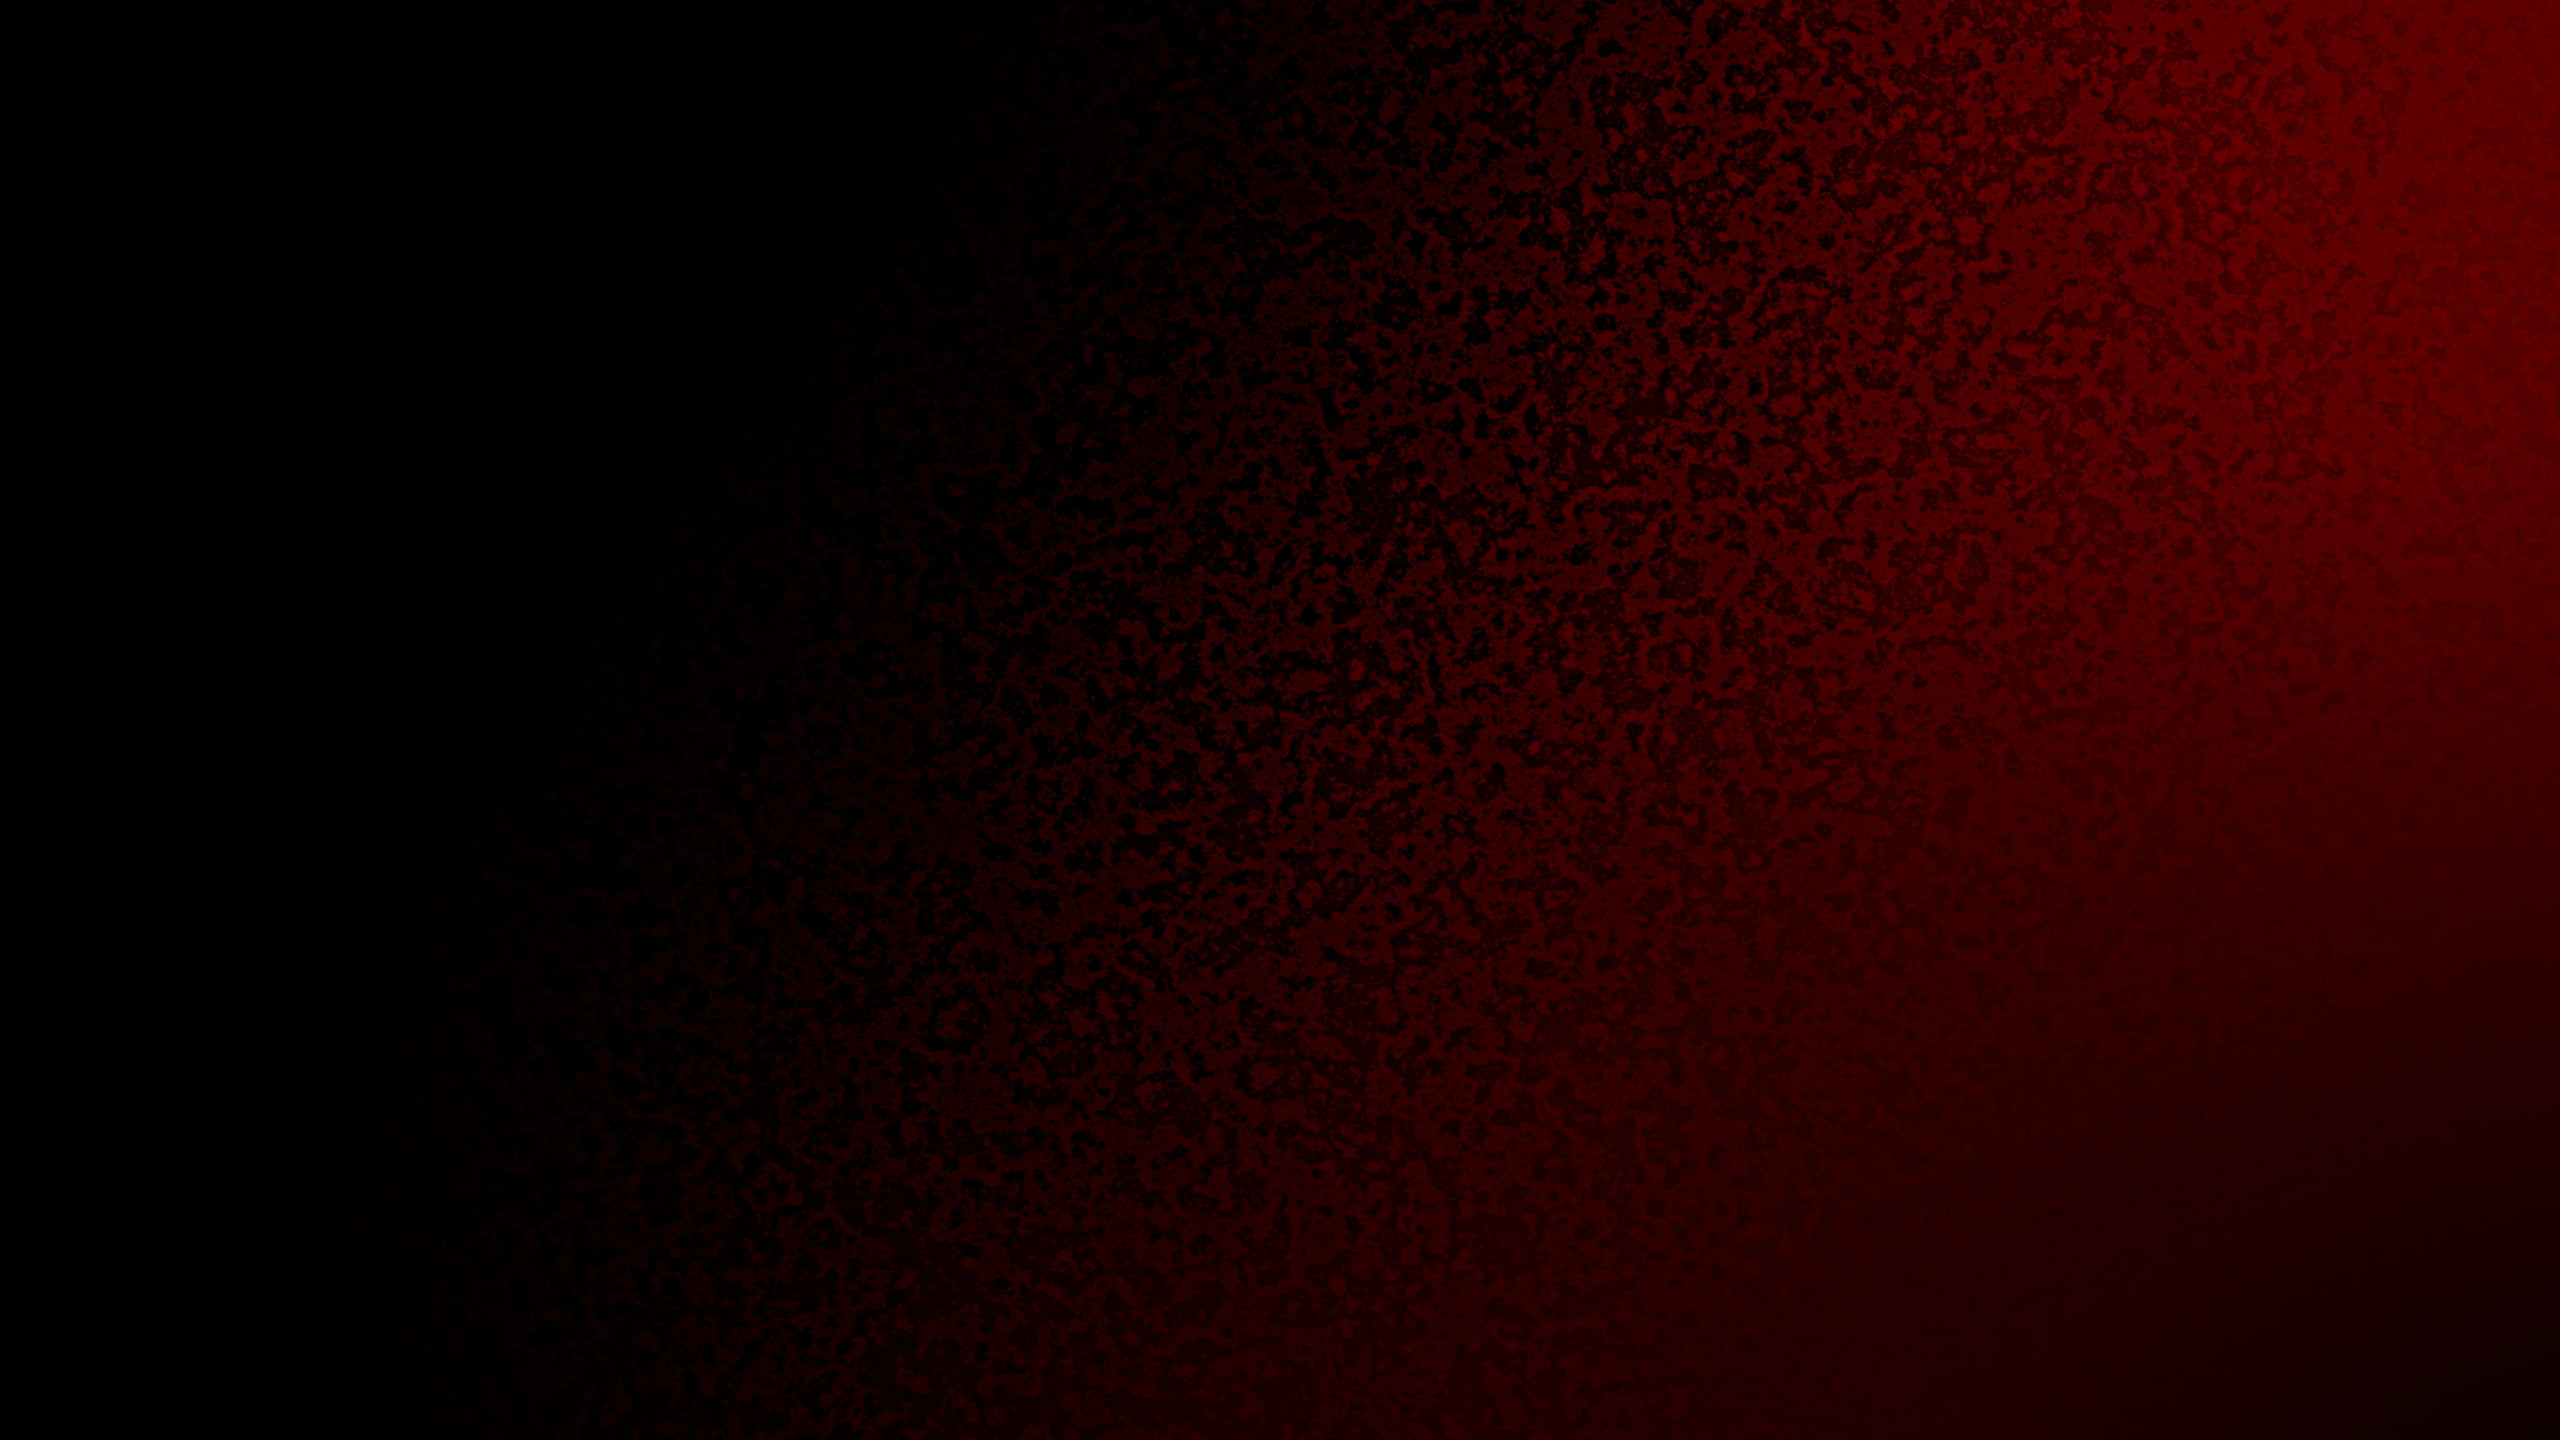 Black And White Area Rug Abstract Dark Simple Red Hd Wallpaper Wallpaper Flare